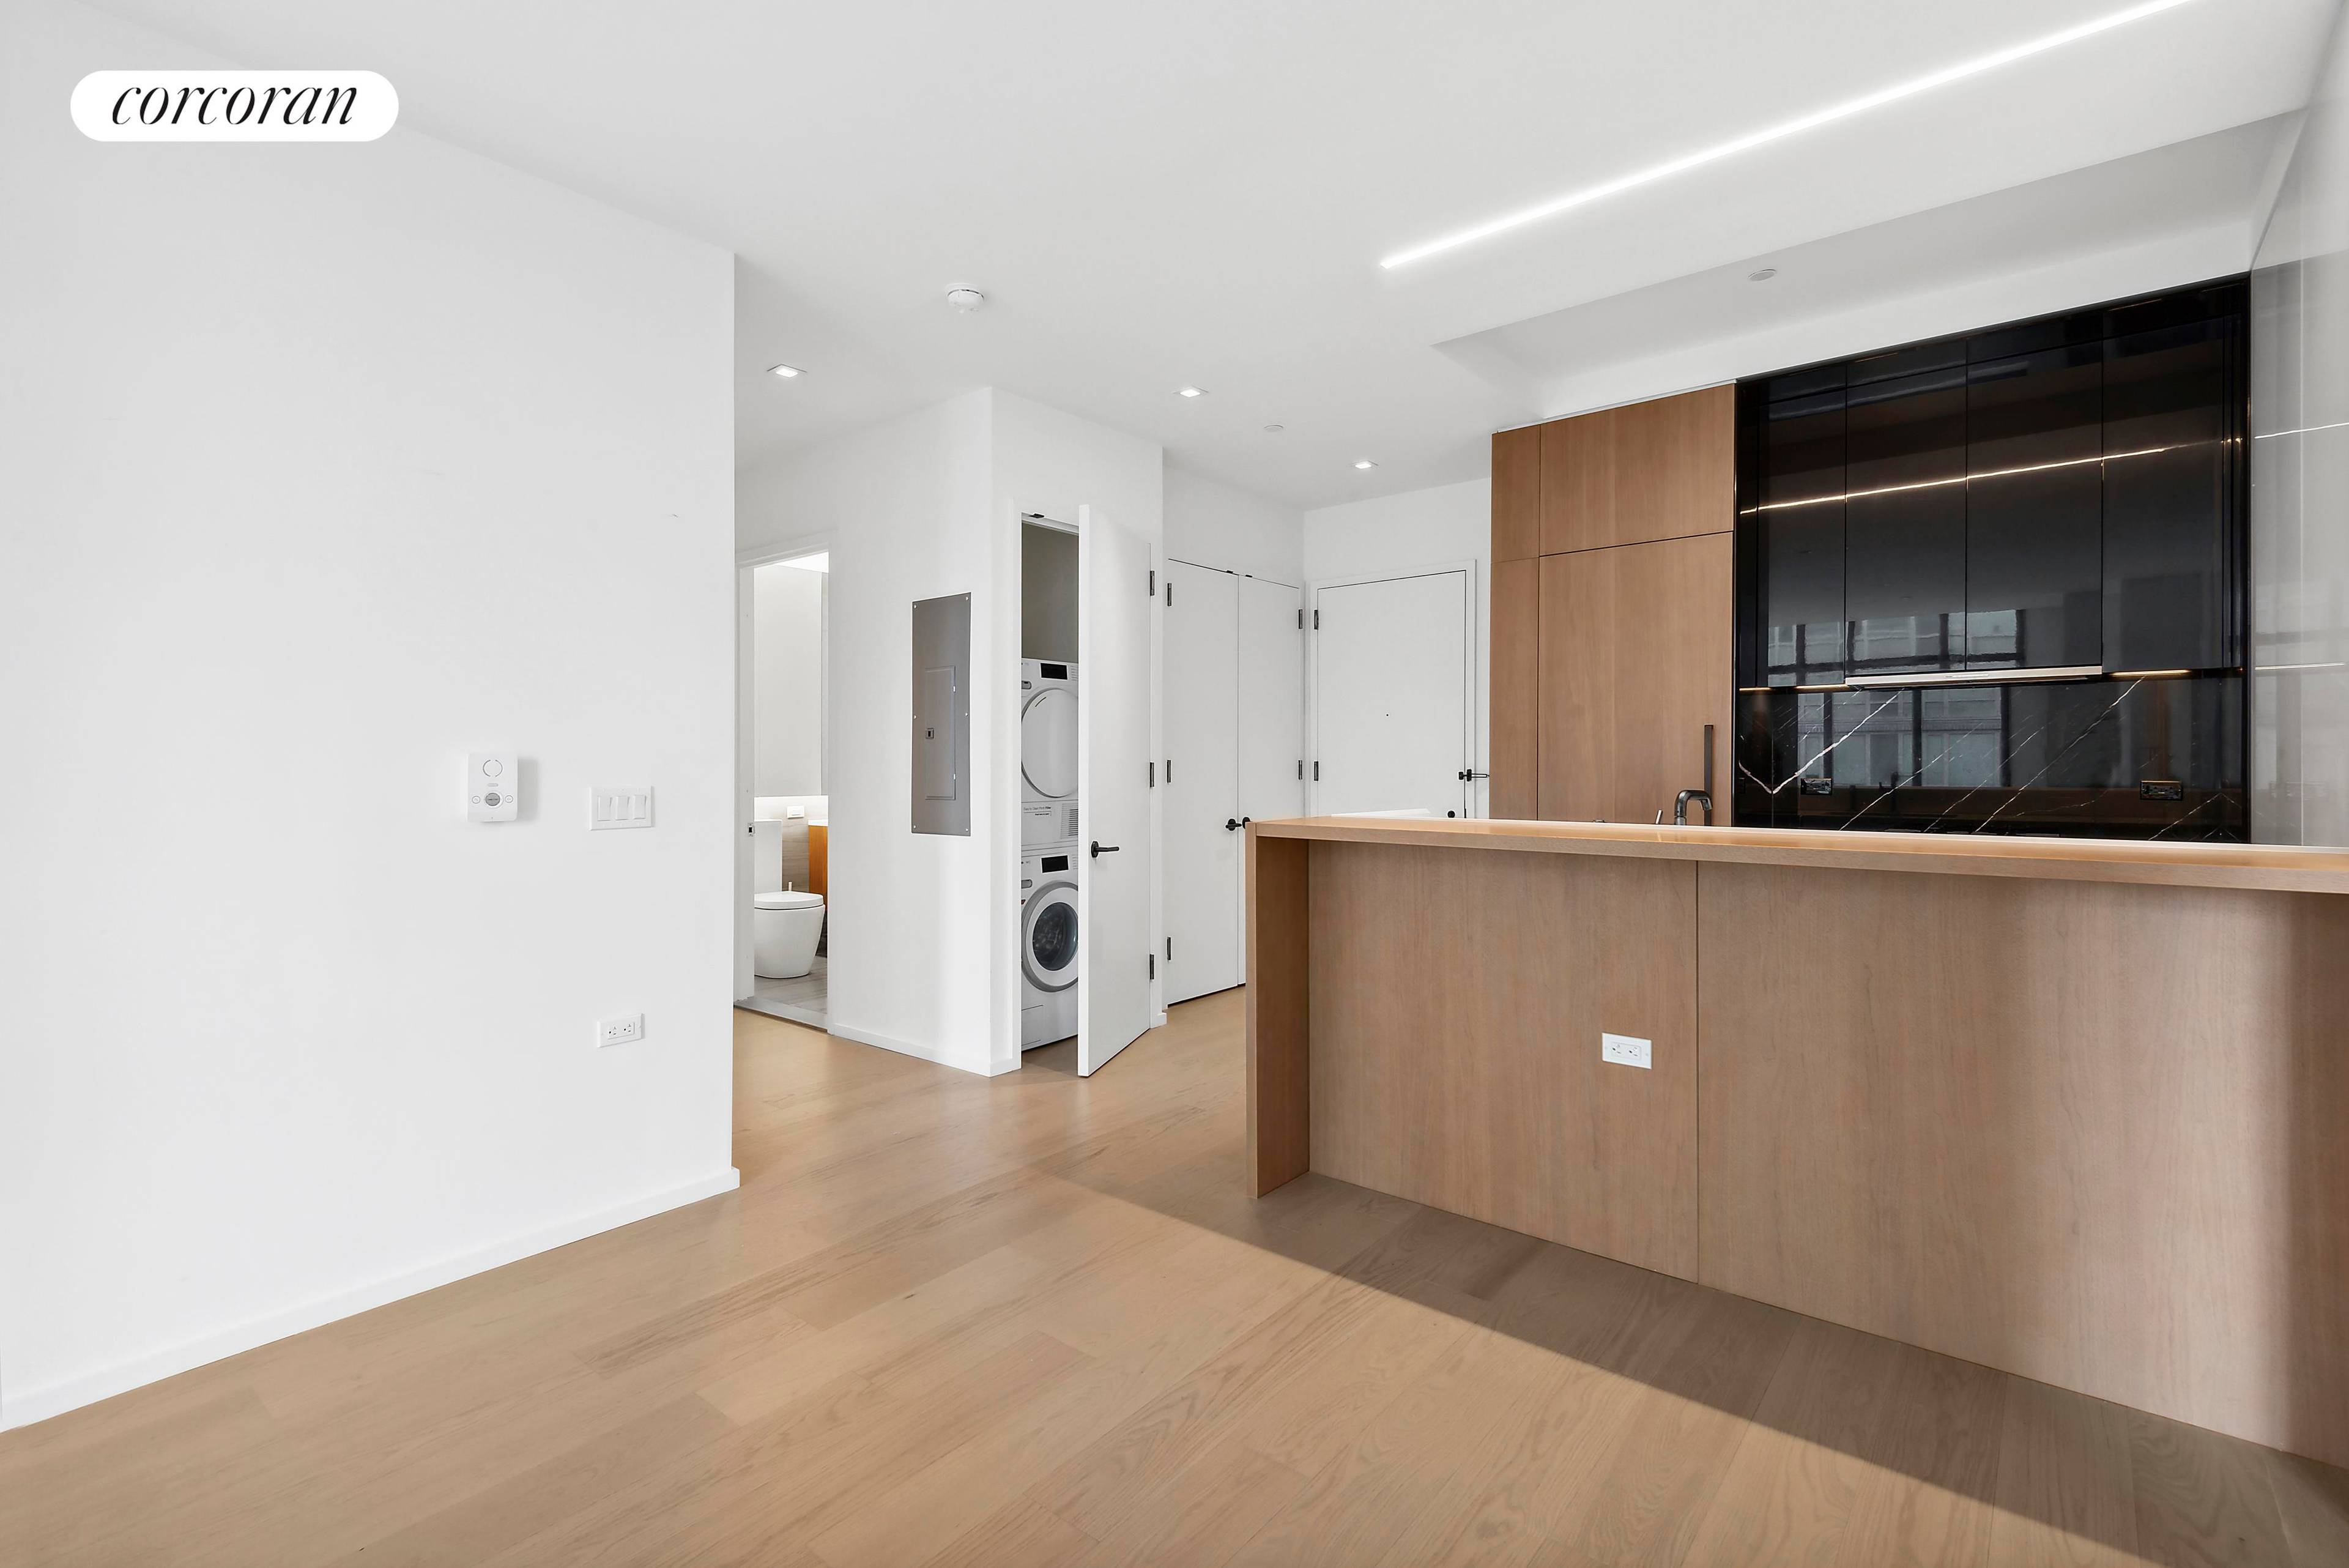 Available Immediately Upon ApprovalWelcome to Residence 8B at 196 Orchard, the premier luxury 24 7 doorman building in the Lower East Side.